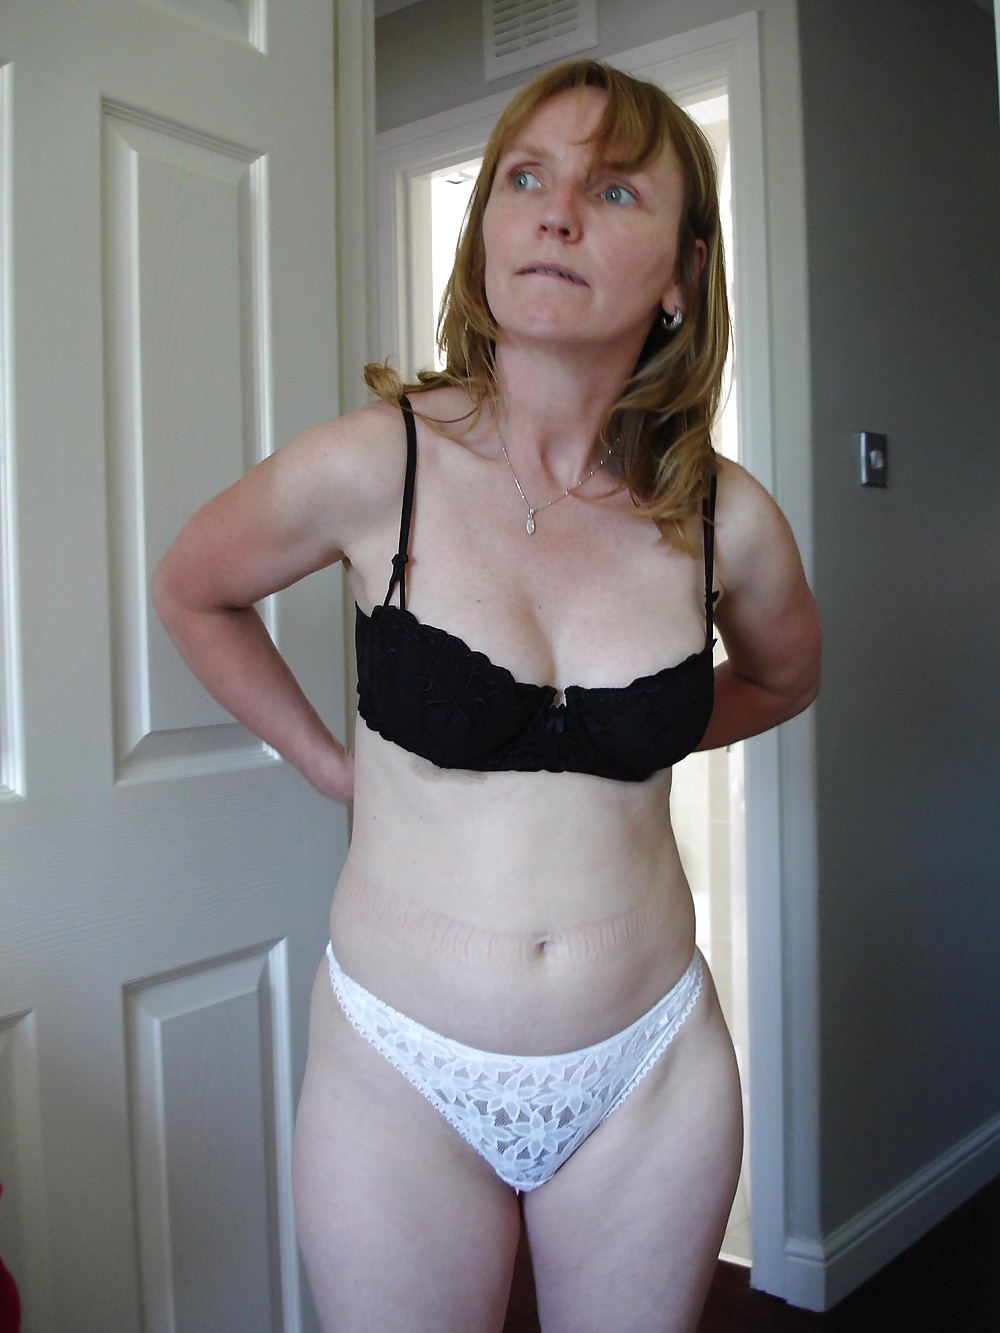 Mature granny fat hairy housewives - panties chubby #18940536